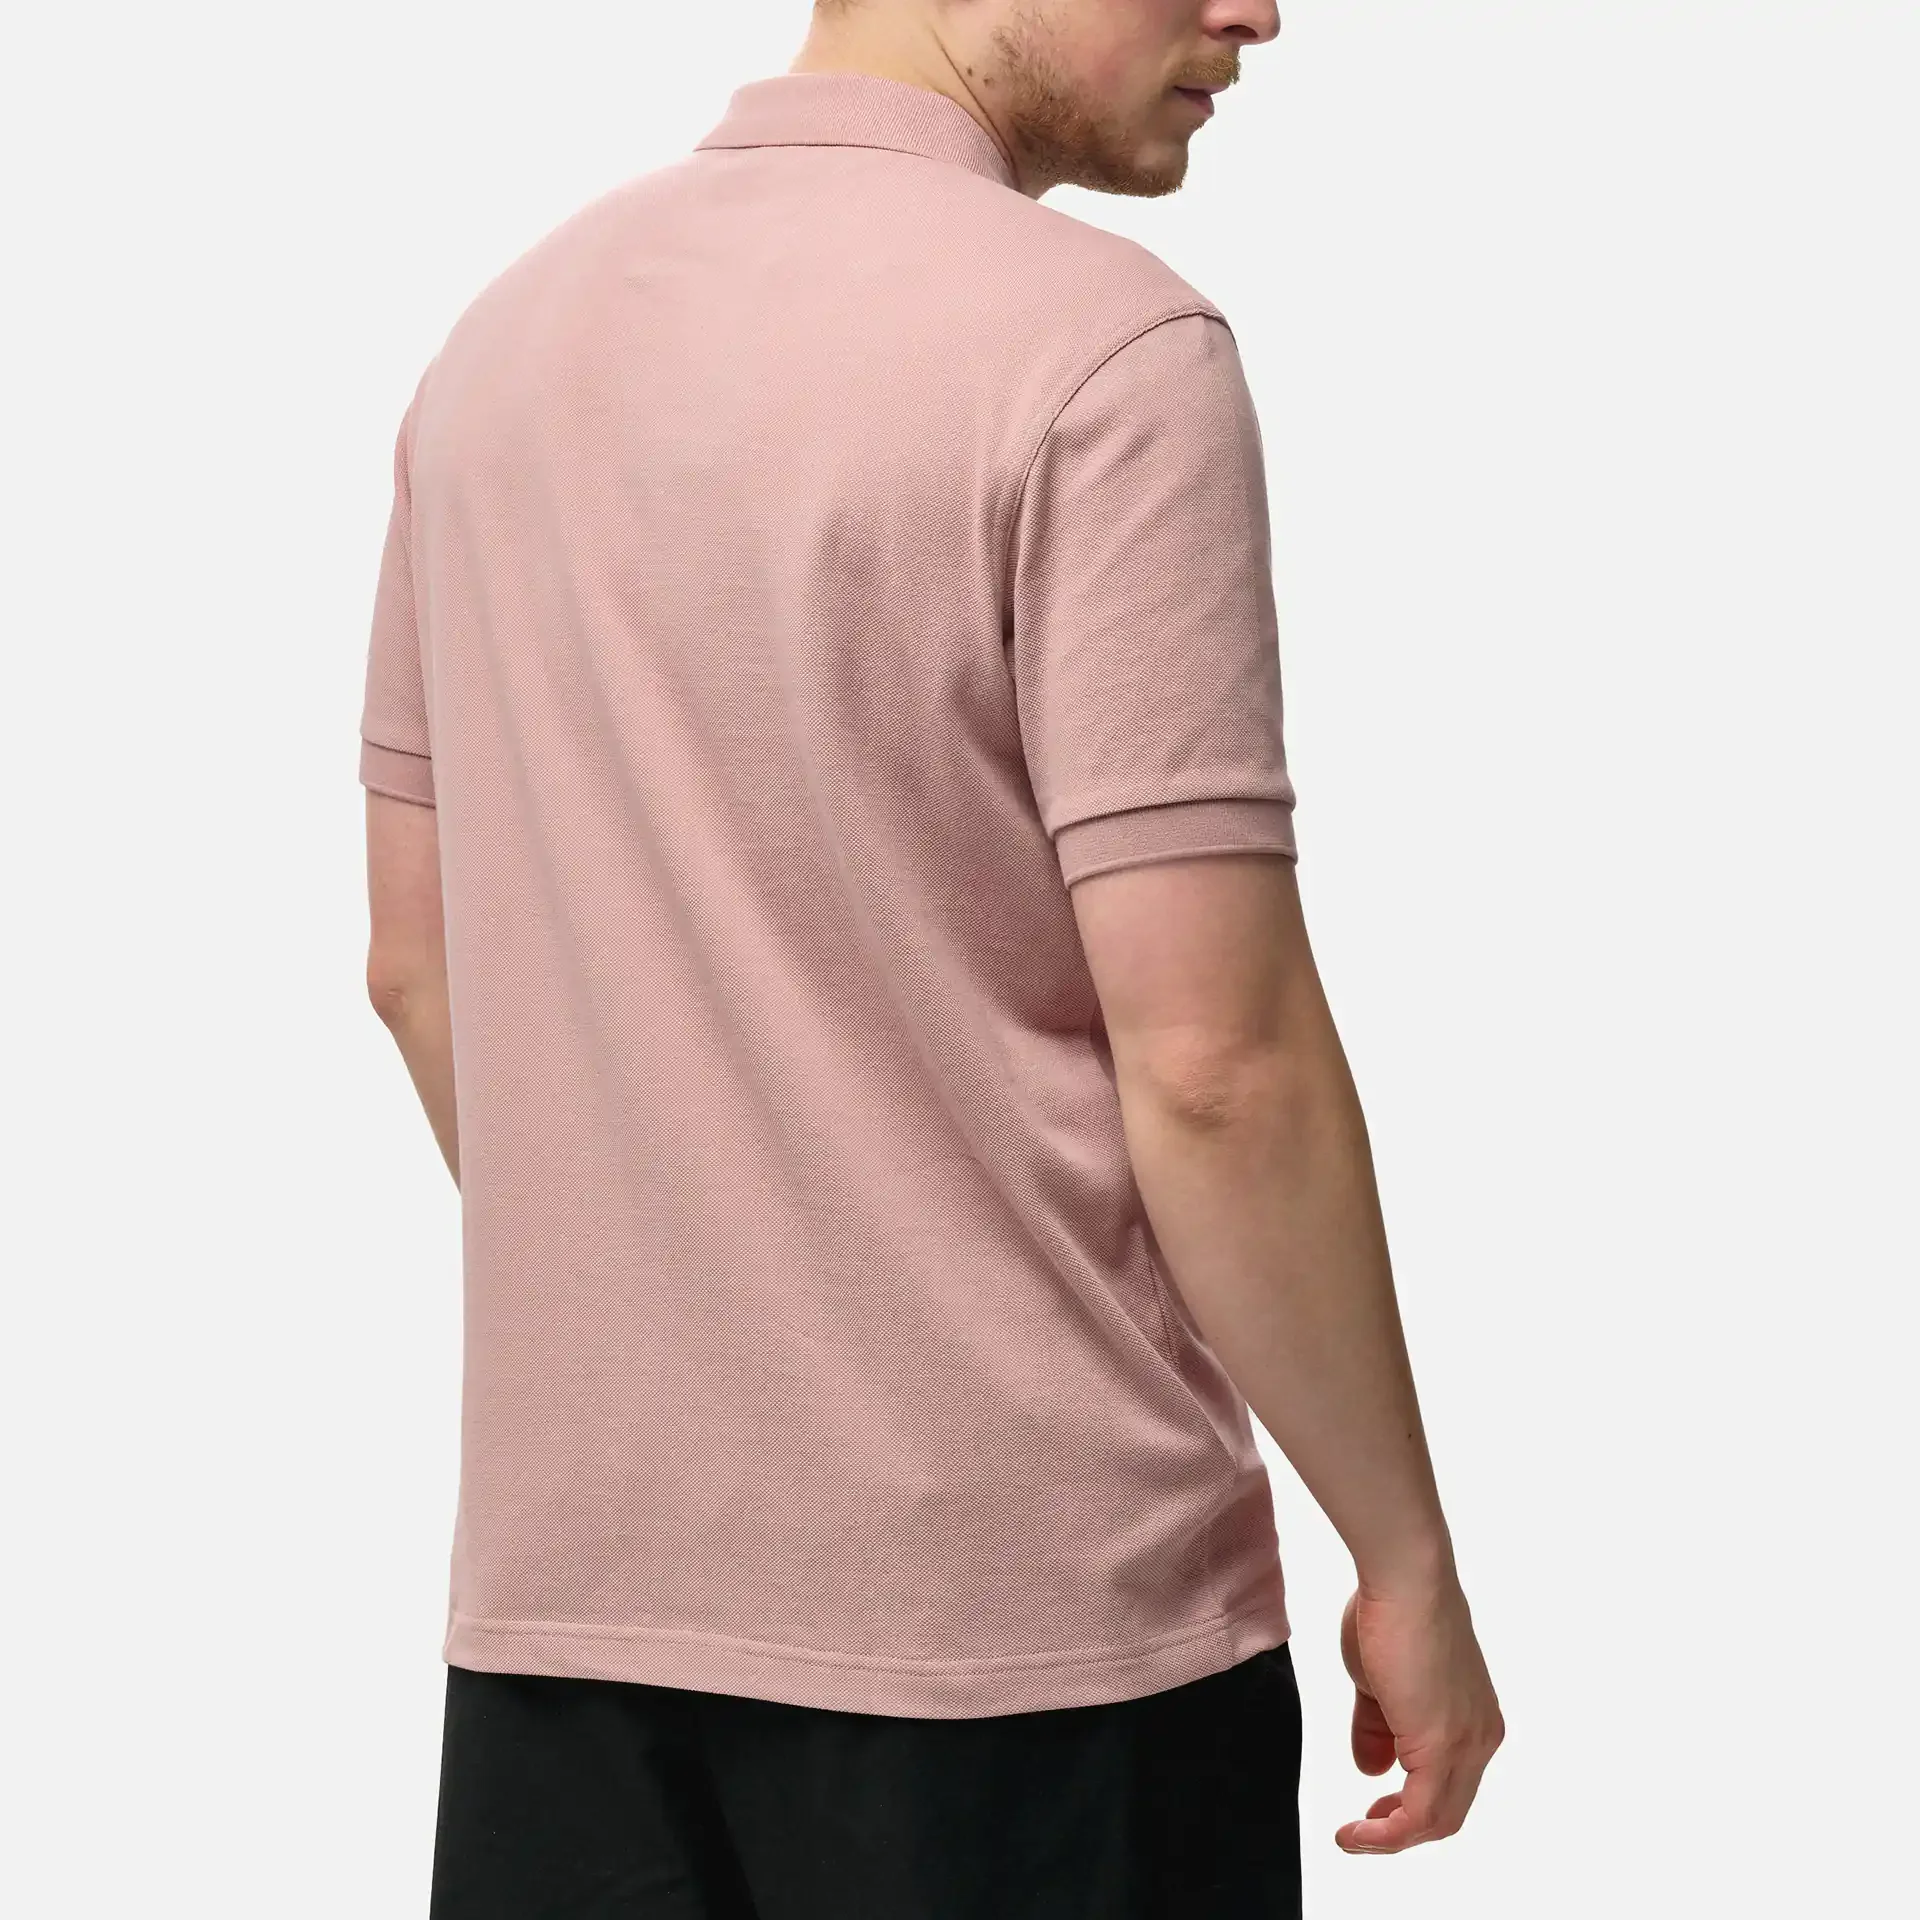 Fred Perry Plain Polo Shirt Dusty Rose Pink/Black